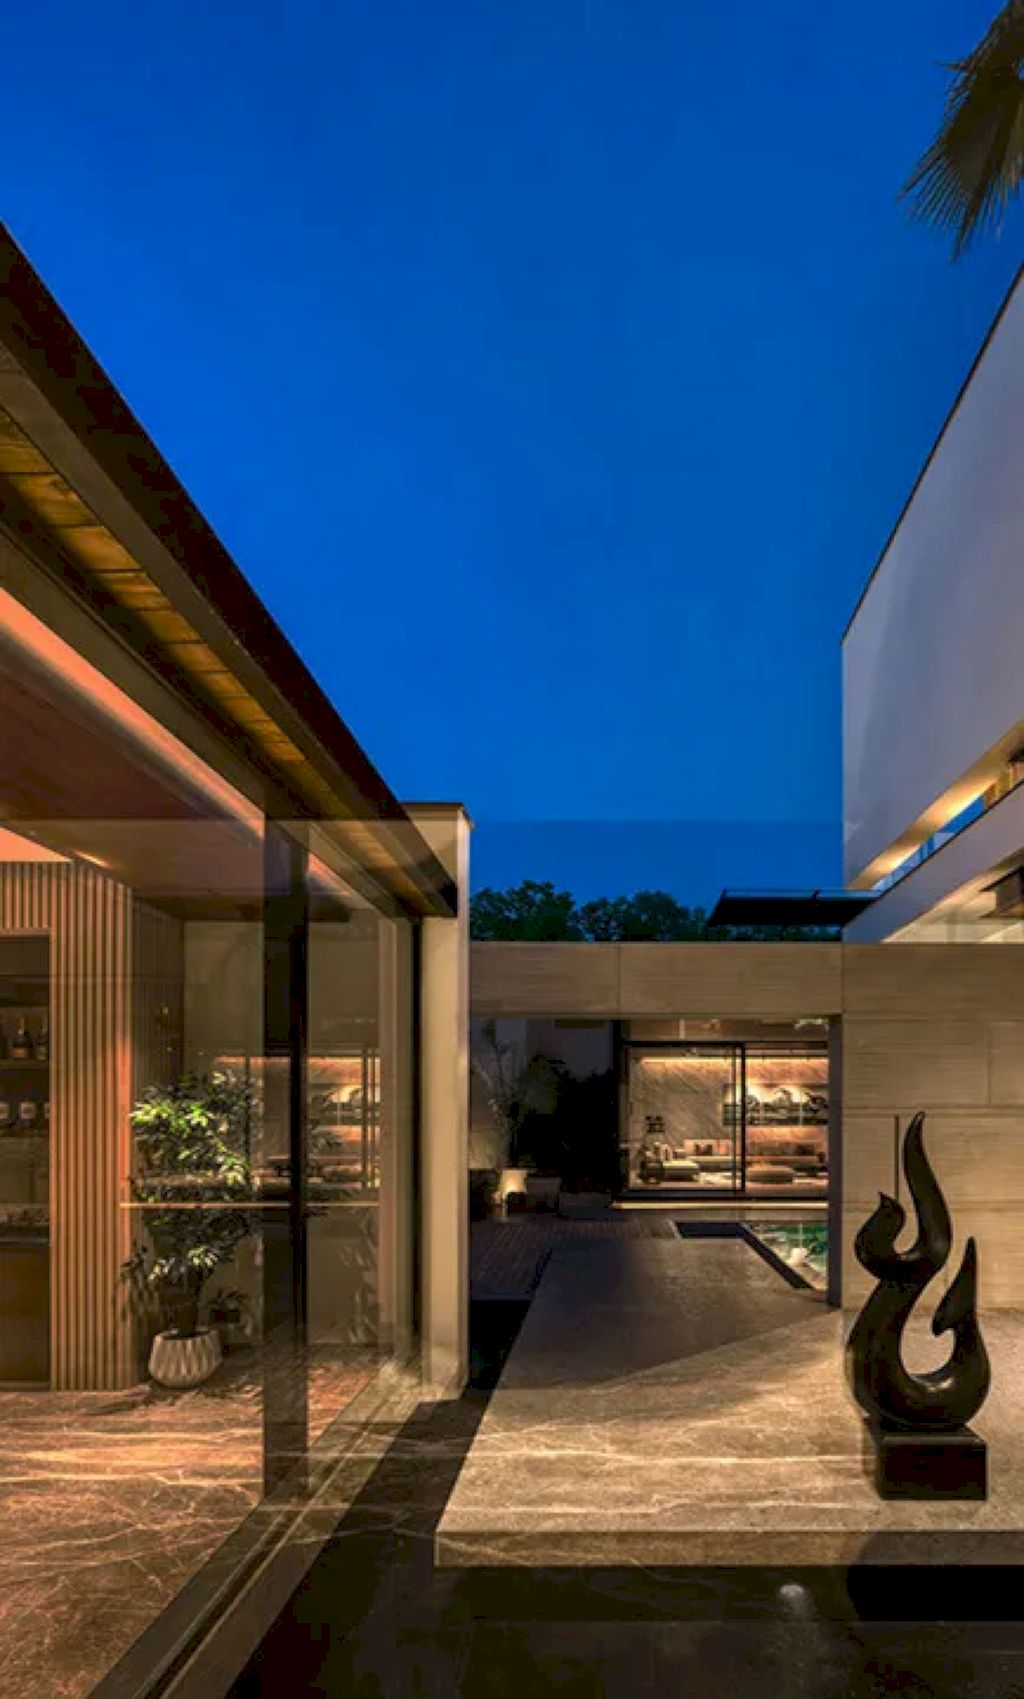 Pool House, Modern Architectural Marvel by DADA Partners